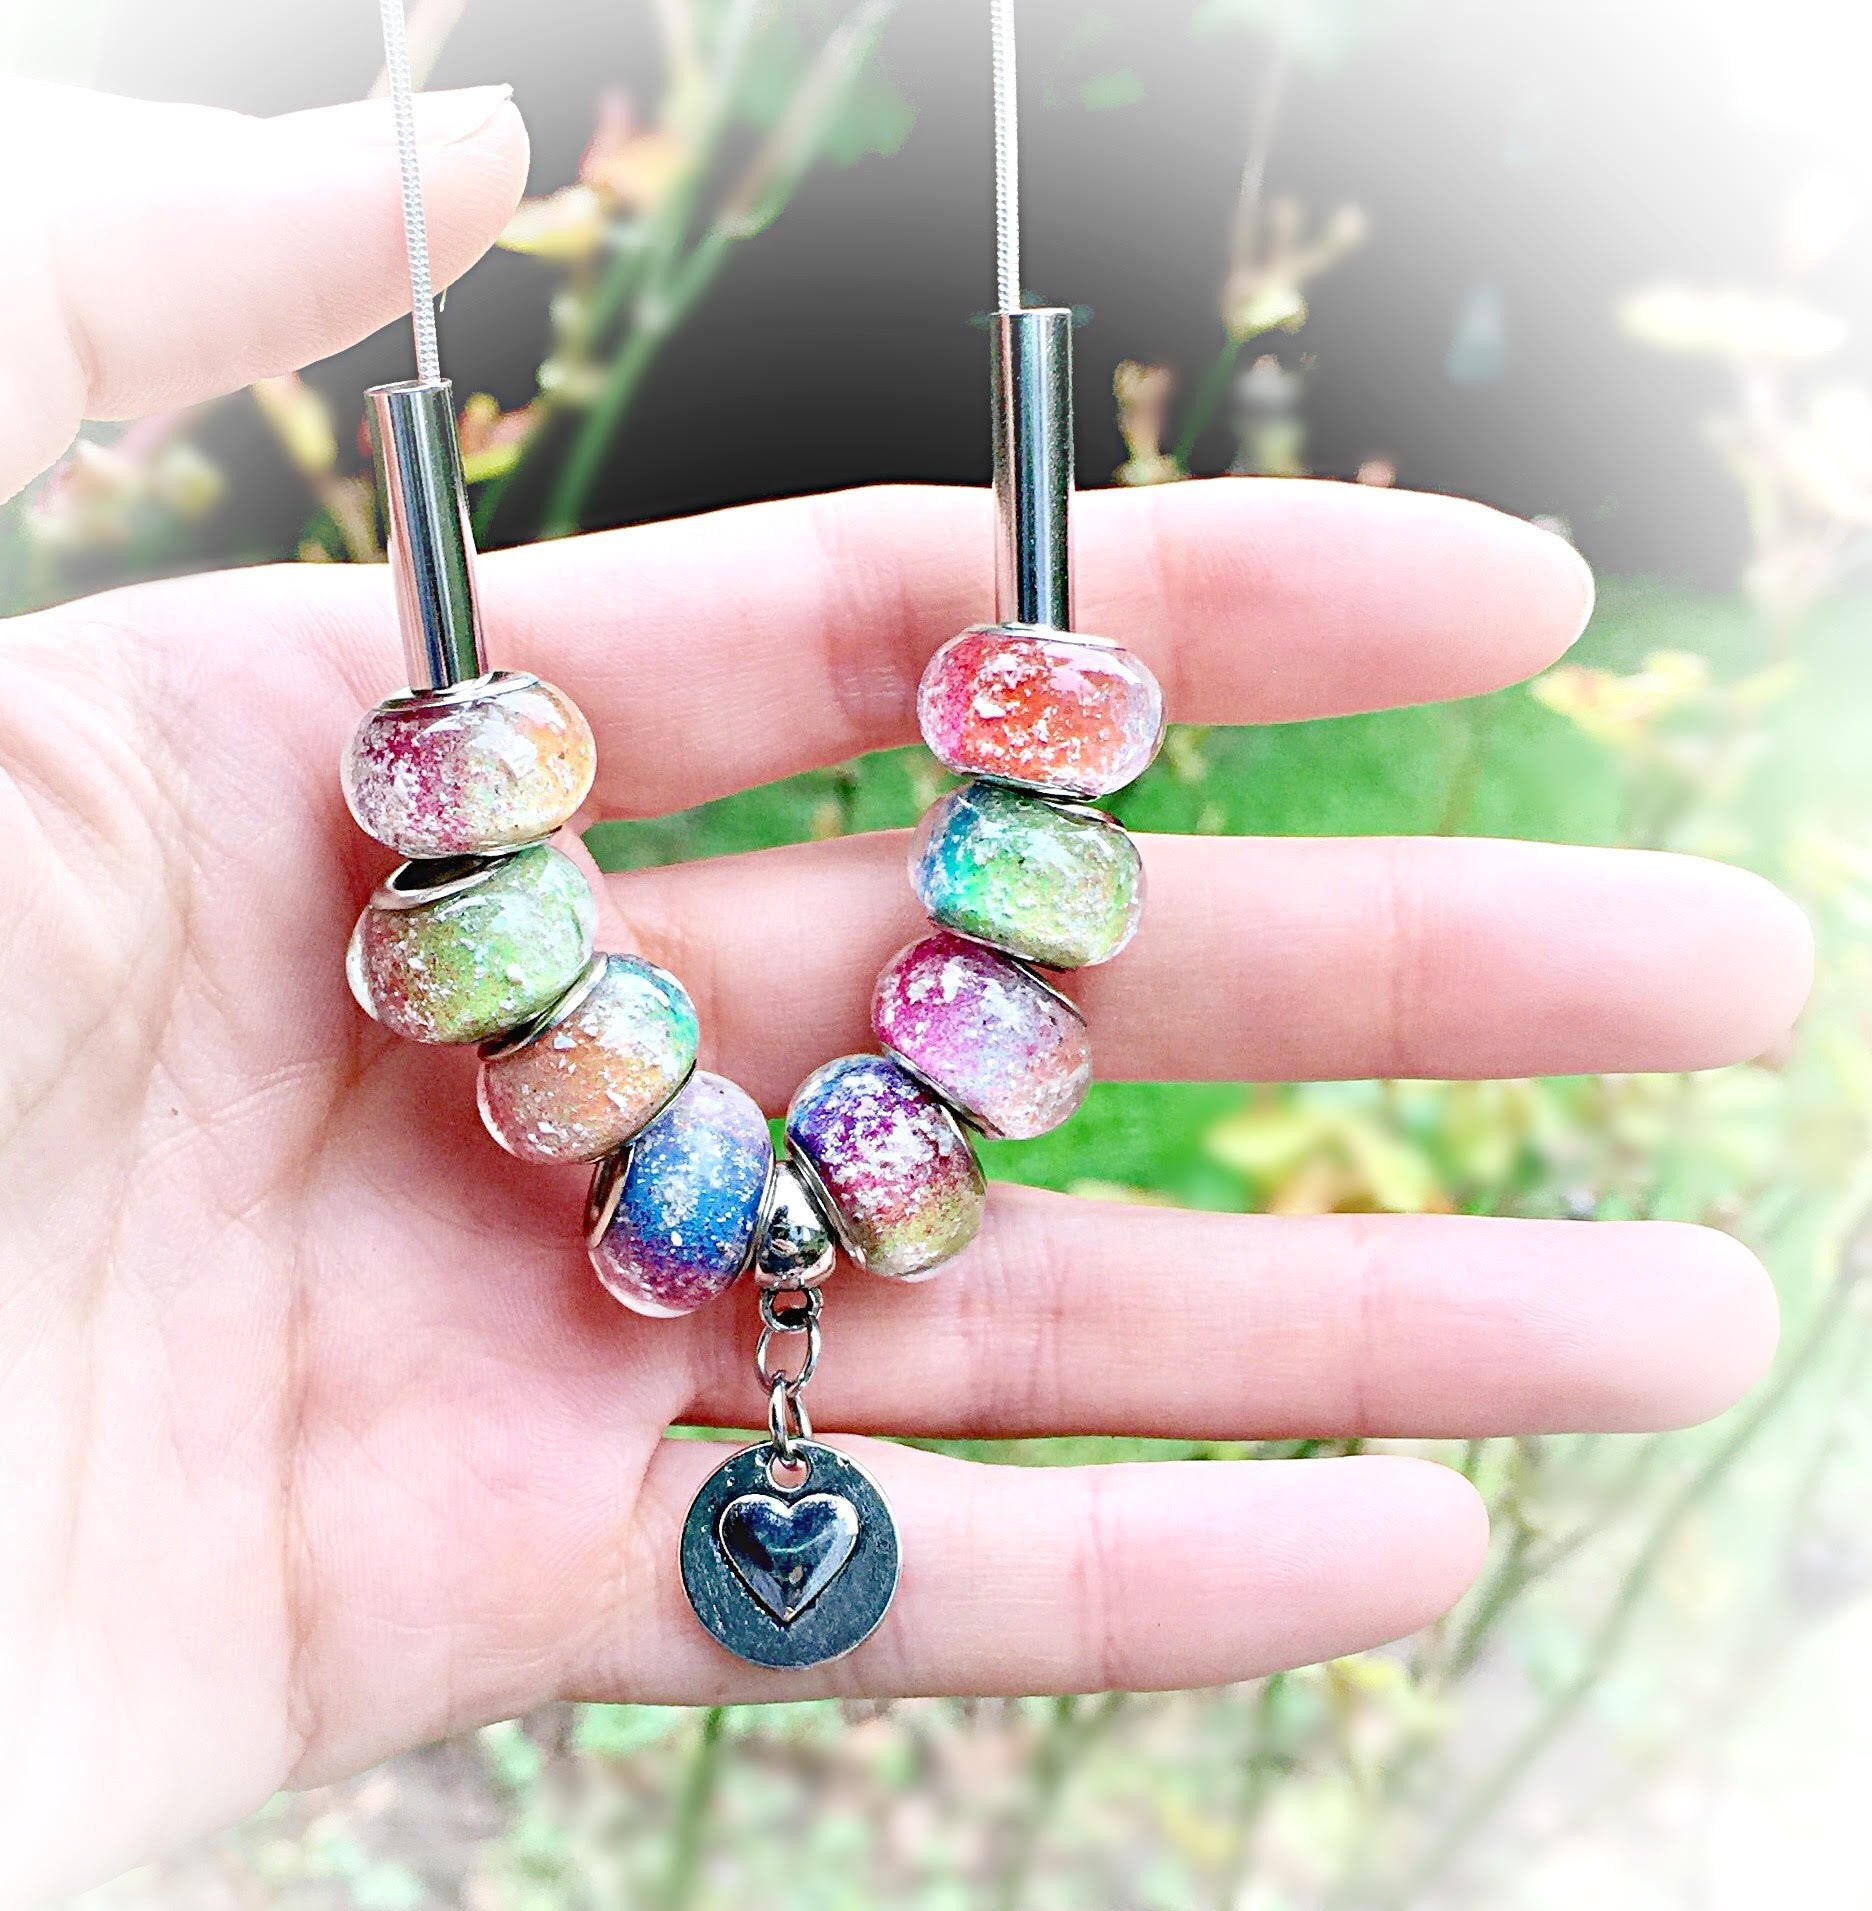 Rainbow's Bridge Necklace with 8 Ash Infused Beads | Memorial Jewelry 24